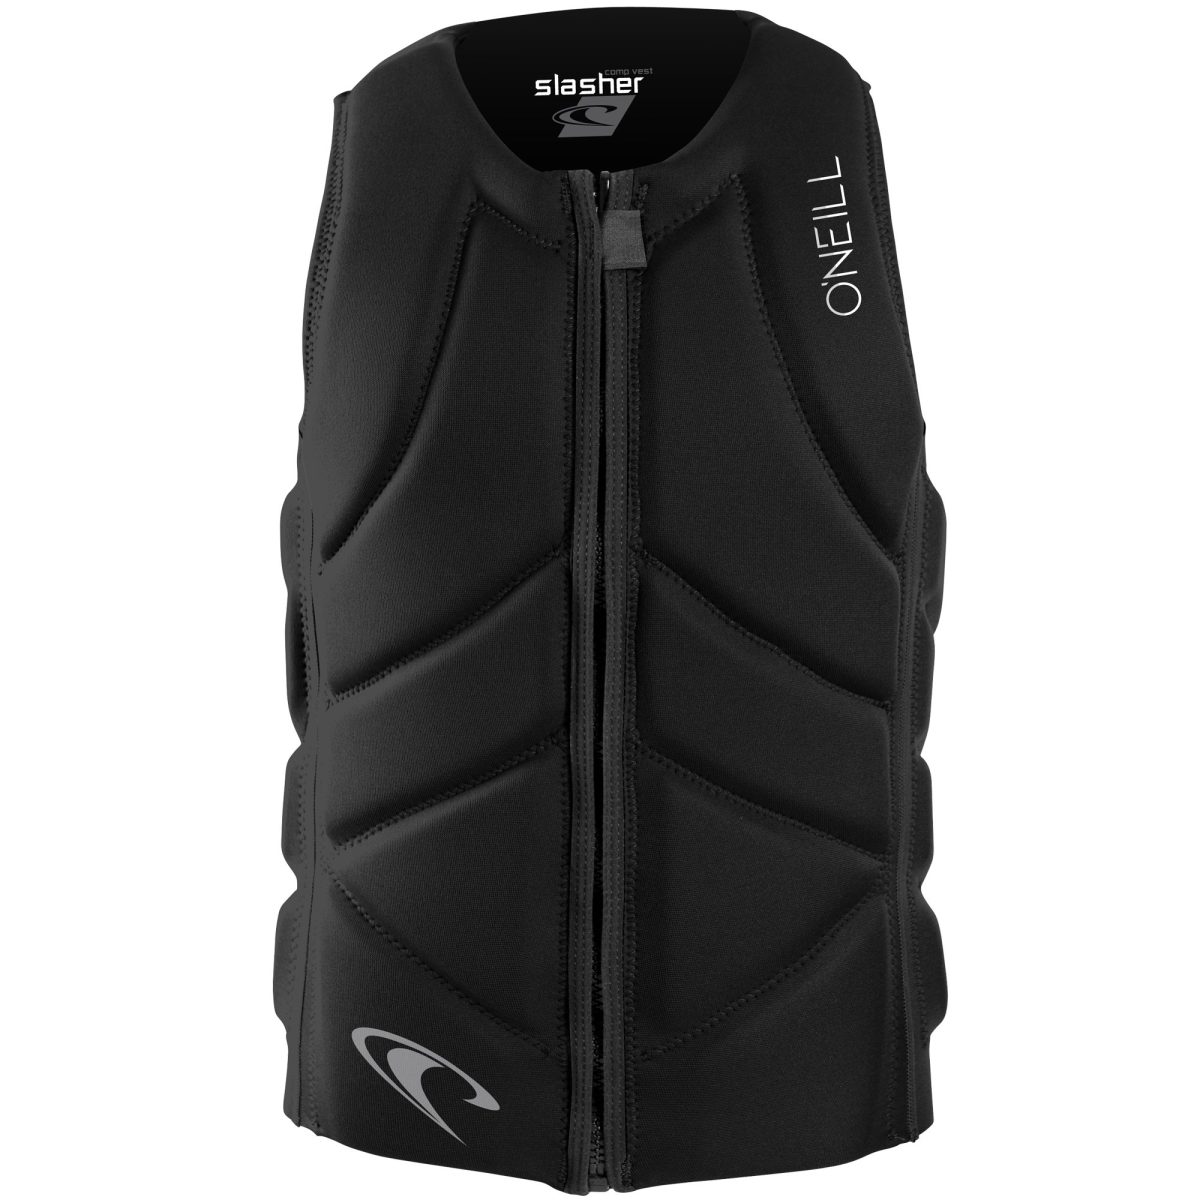 O'Neill Men's Slasher Competition Watersports Vest - Black - S